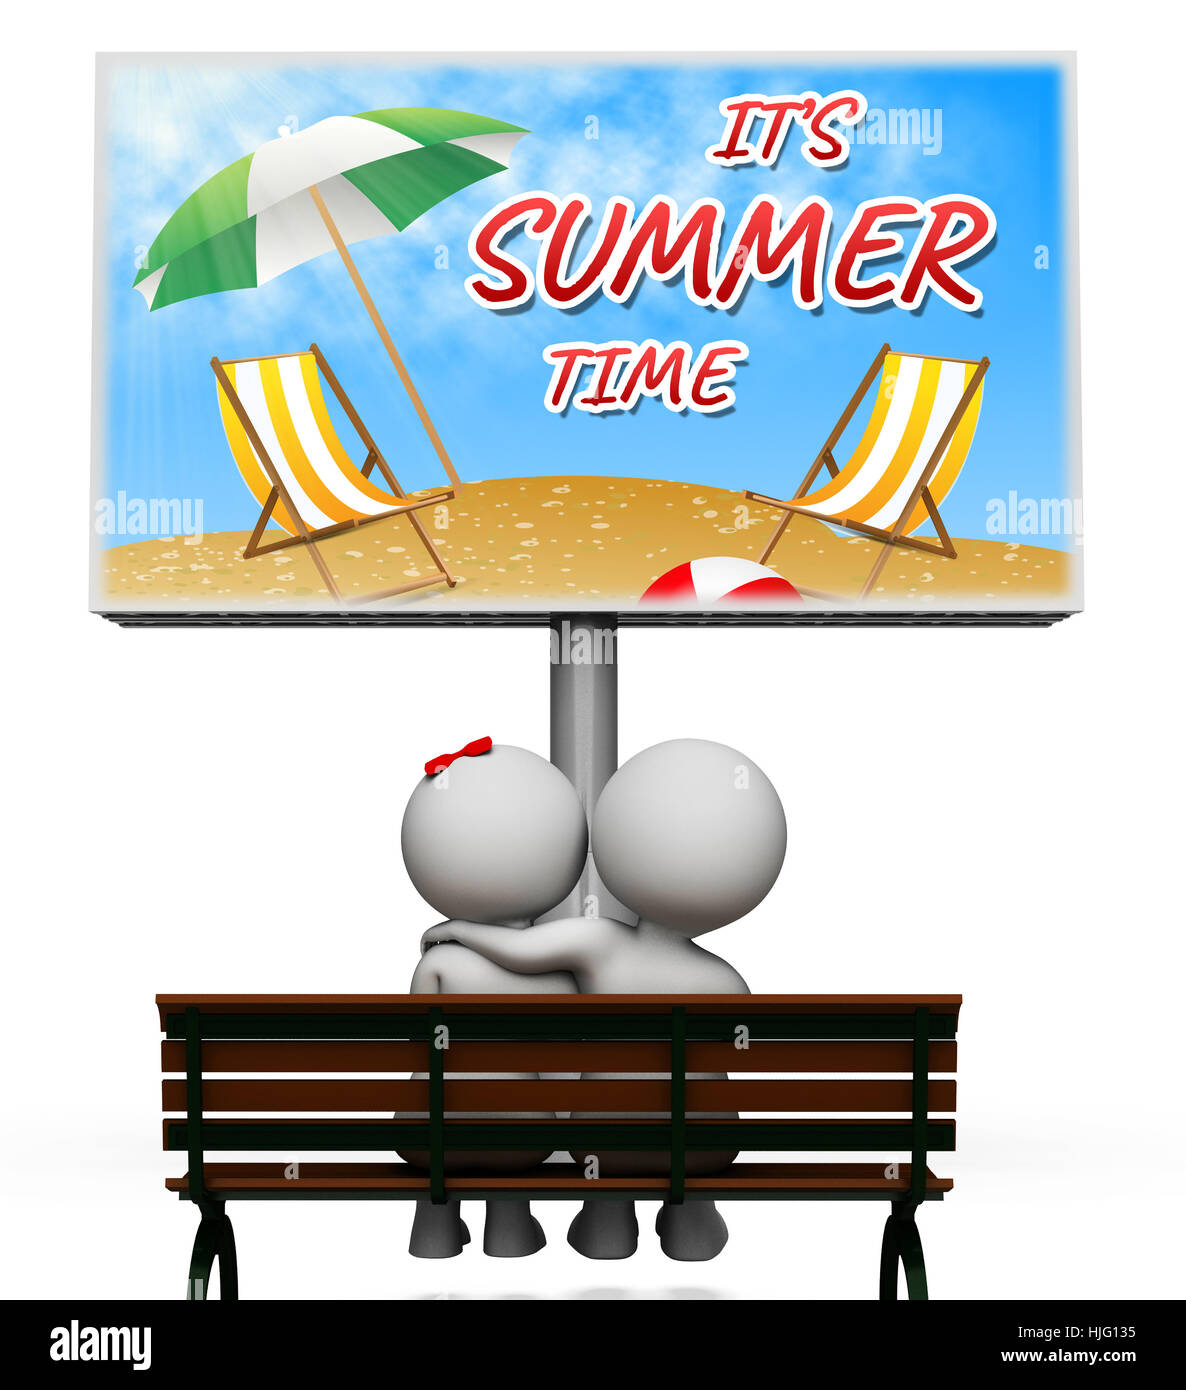 Summer Time Sign Showing On Holiday Vacationing Now 3d Illustration Stock Photo